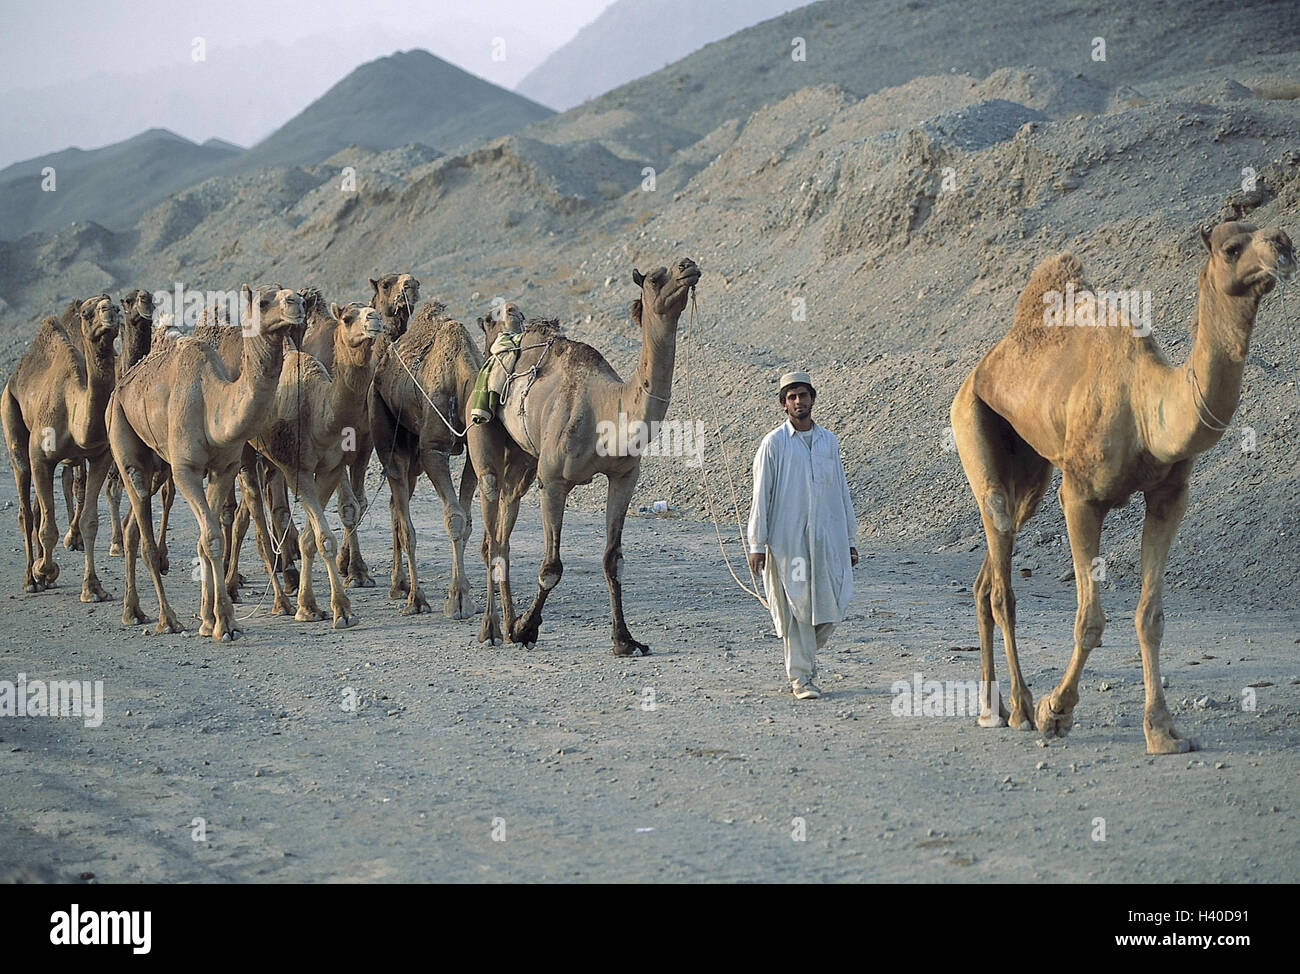 Iran, highland, riding camels, camel drivers, no model release, outside, Asia, the Near East, mountainous country, person, camels, Camelidae, cloven-hoofed animals, Schwielensohler, dromedary, Camelus dromedarius, camel breeder, cattle trade Stock Photo